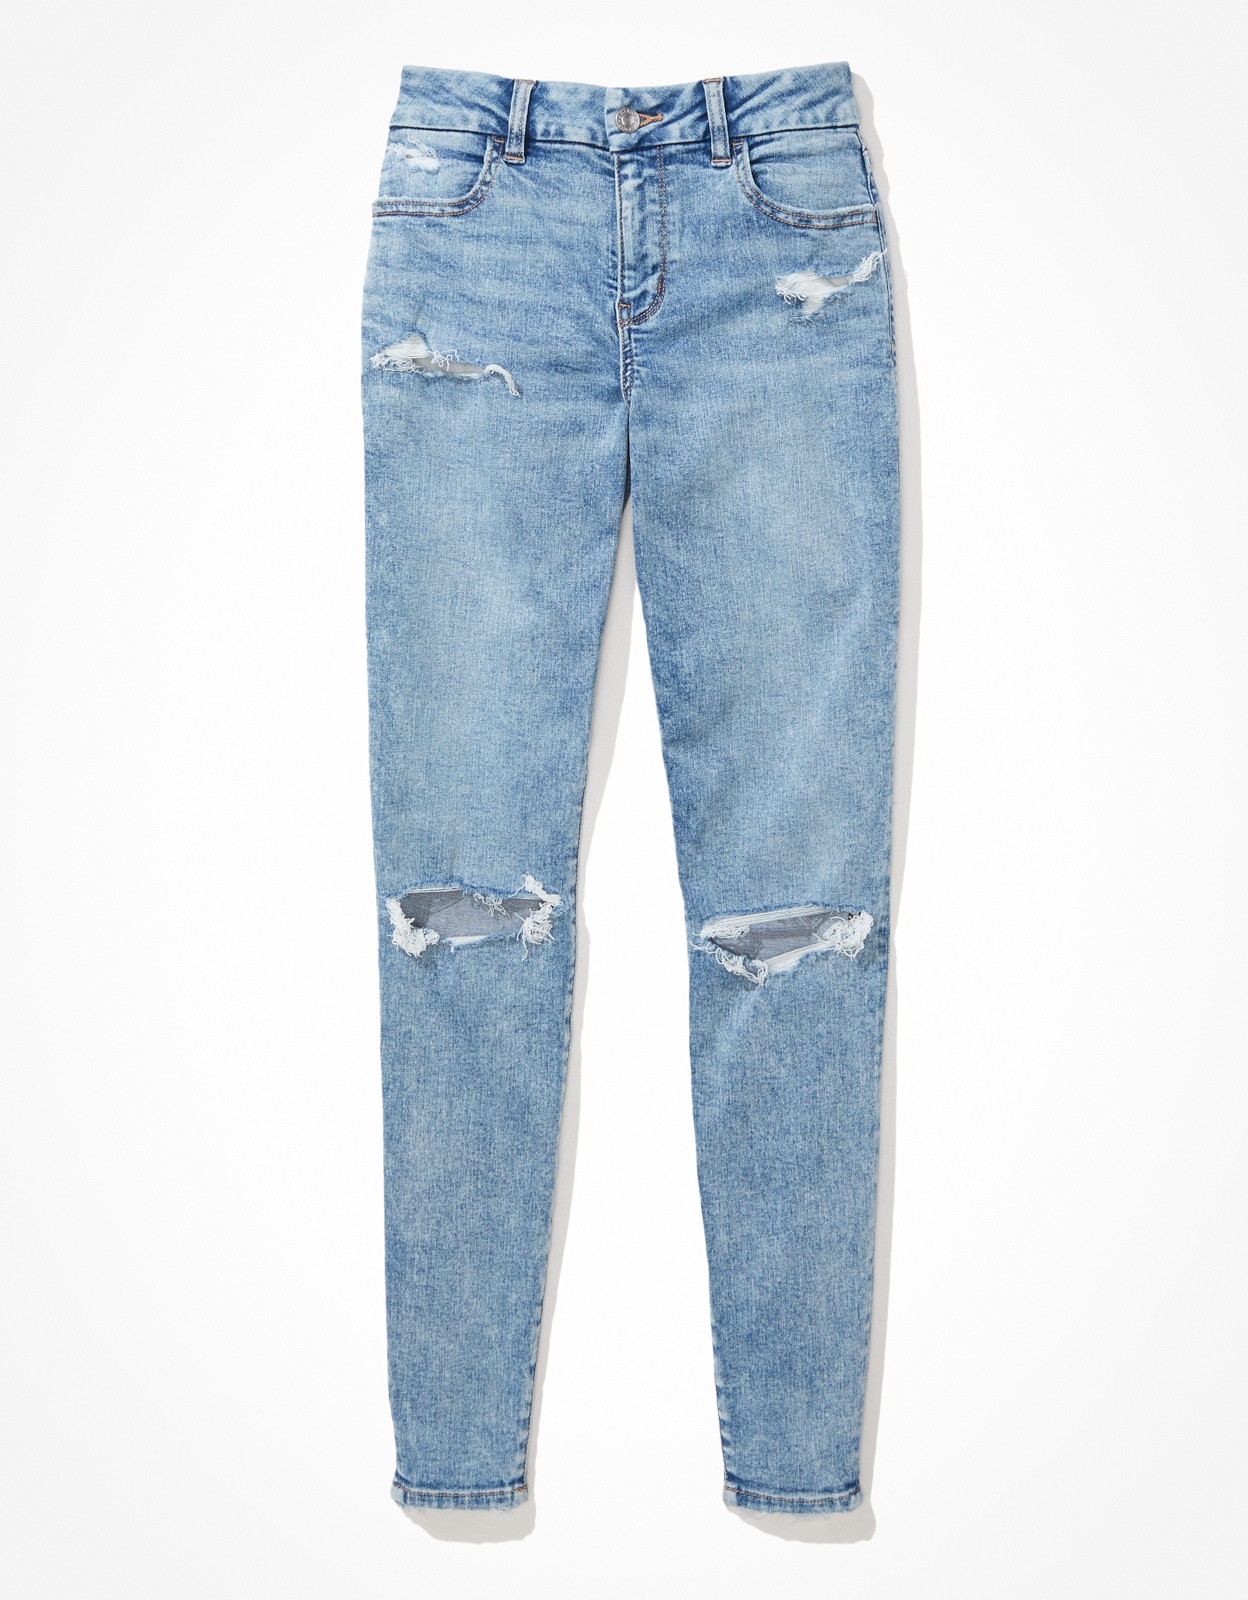 American Eagle Outfitters AE Ripped Jeans Size 6 - $23 (61% Off Retail) -  From Maya